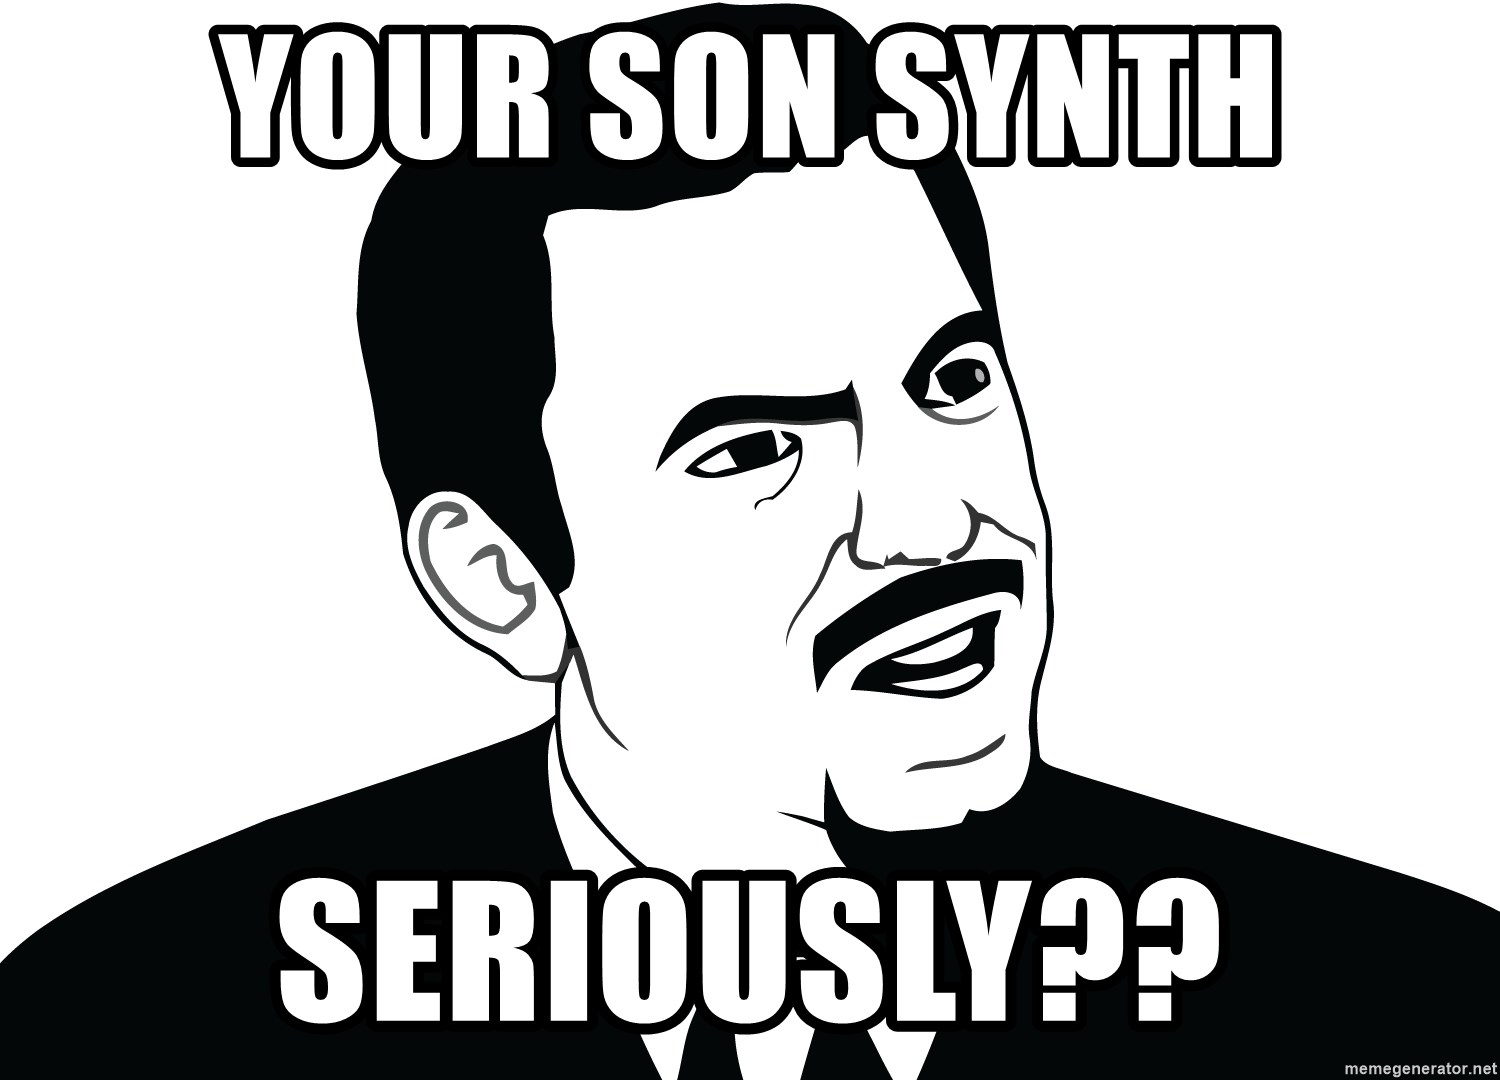 Are you serious face  - Your soN synth Seriously??